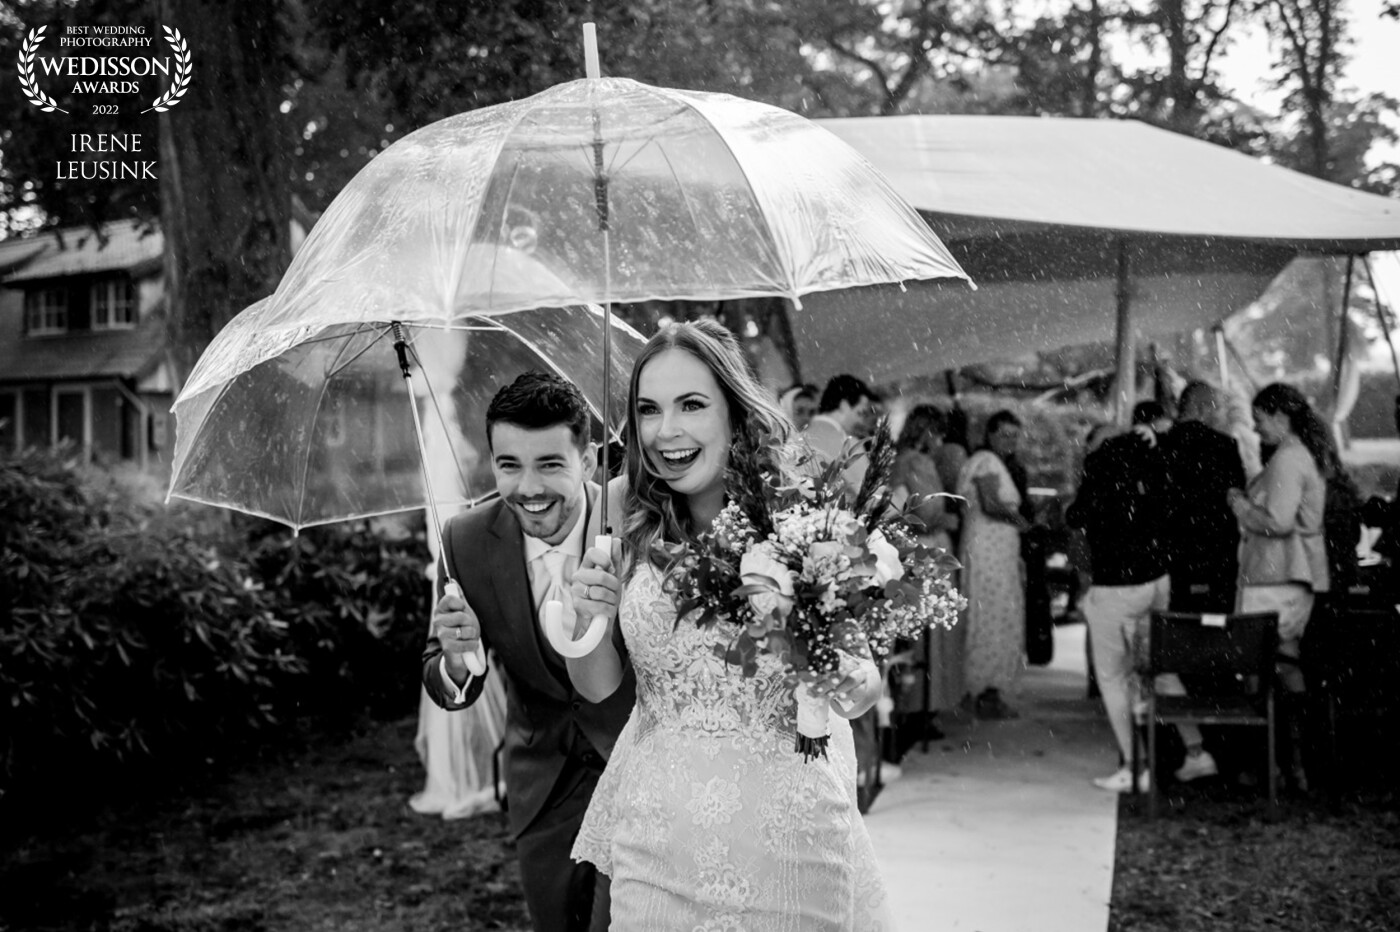 Dutch weather! After an intimite ceremonie while bride and groom were blessed by beautiful sunlight, the weather changed within 5 minutes and rain came pouring down. But it didn't matter to this couple!